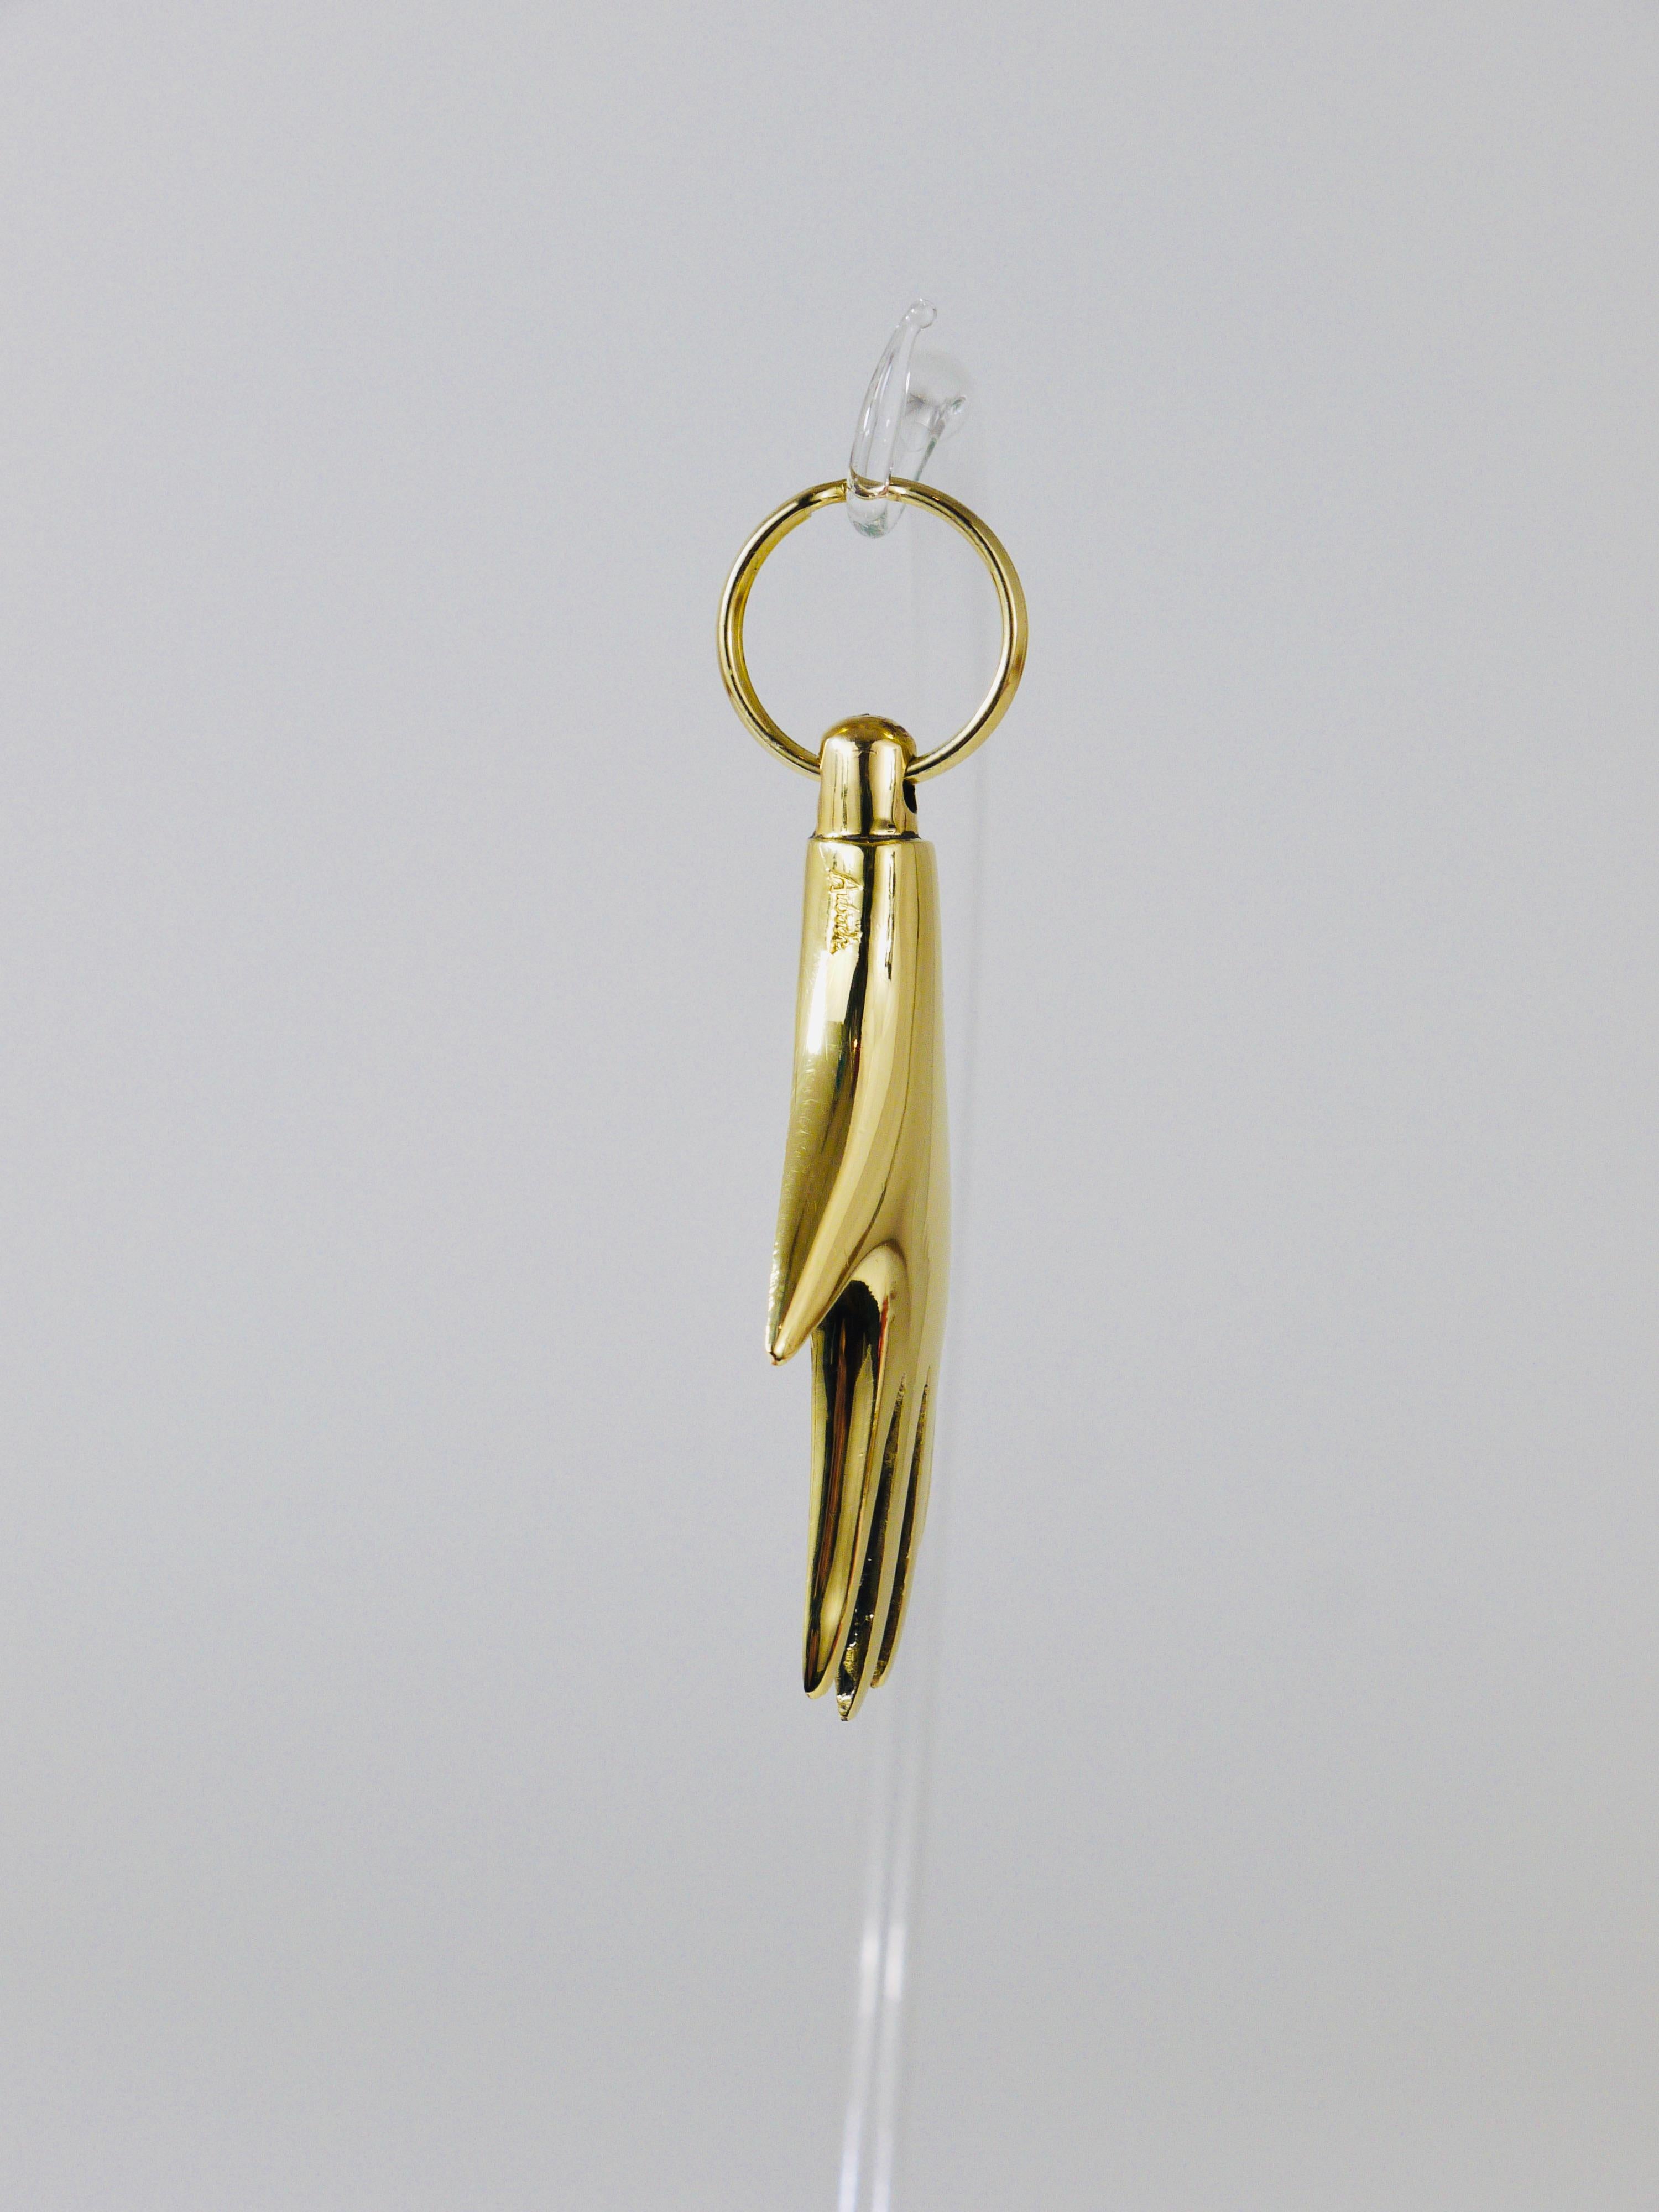 20th Century Carl Auböck Handcrafted Midcentury Hand Brass Figurine Key Ring Chain Holder For Sale